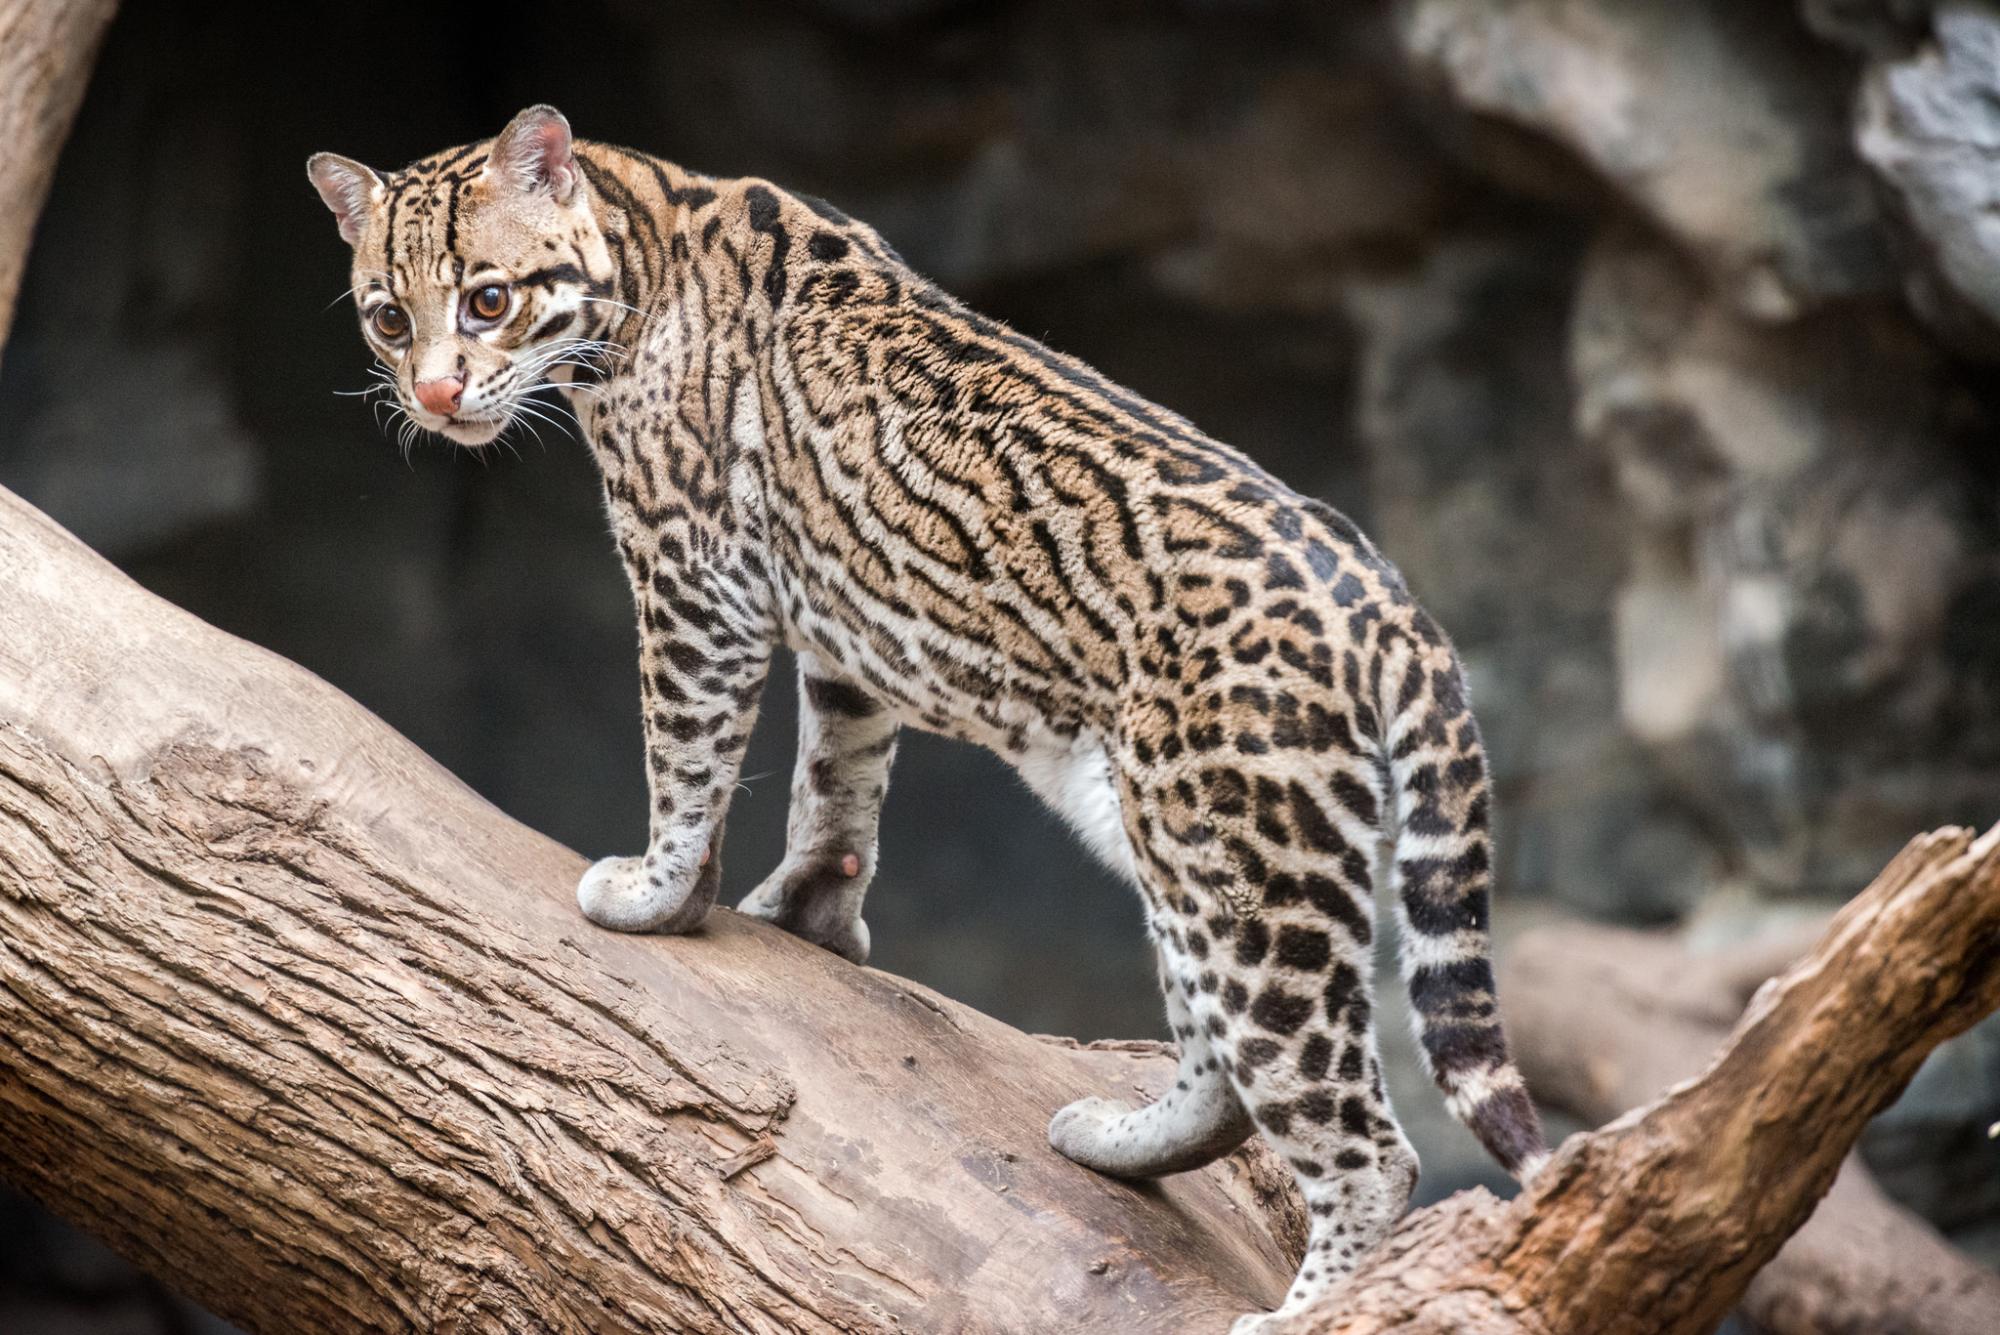 Ocelot standing on a branch | Photo by Eric Kilby